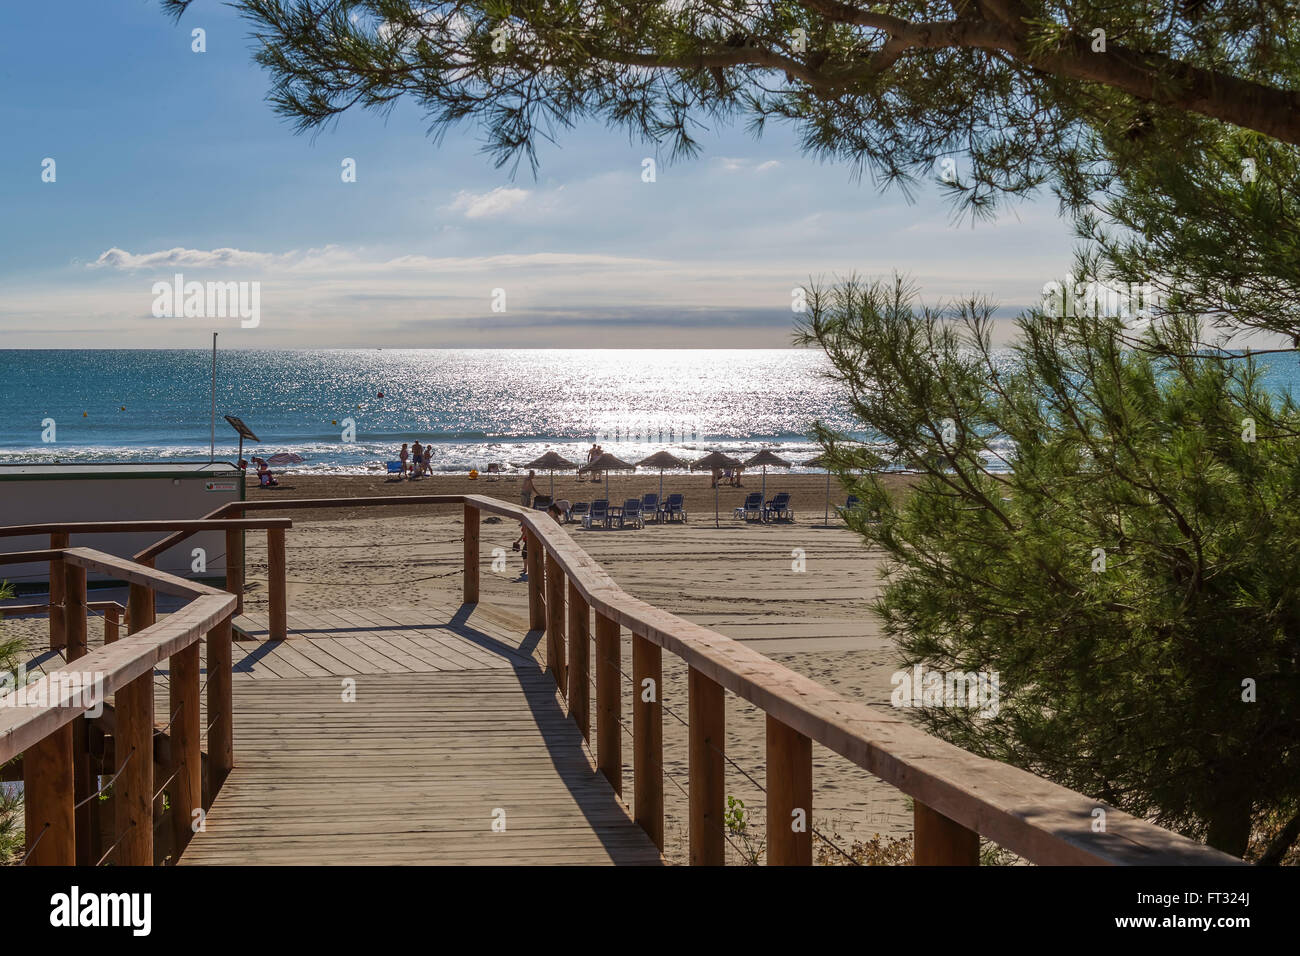 Wooden descent to the beach, Spain Stock Photo